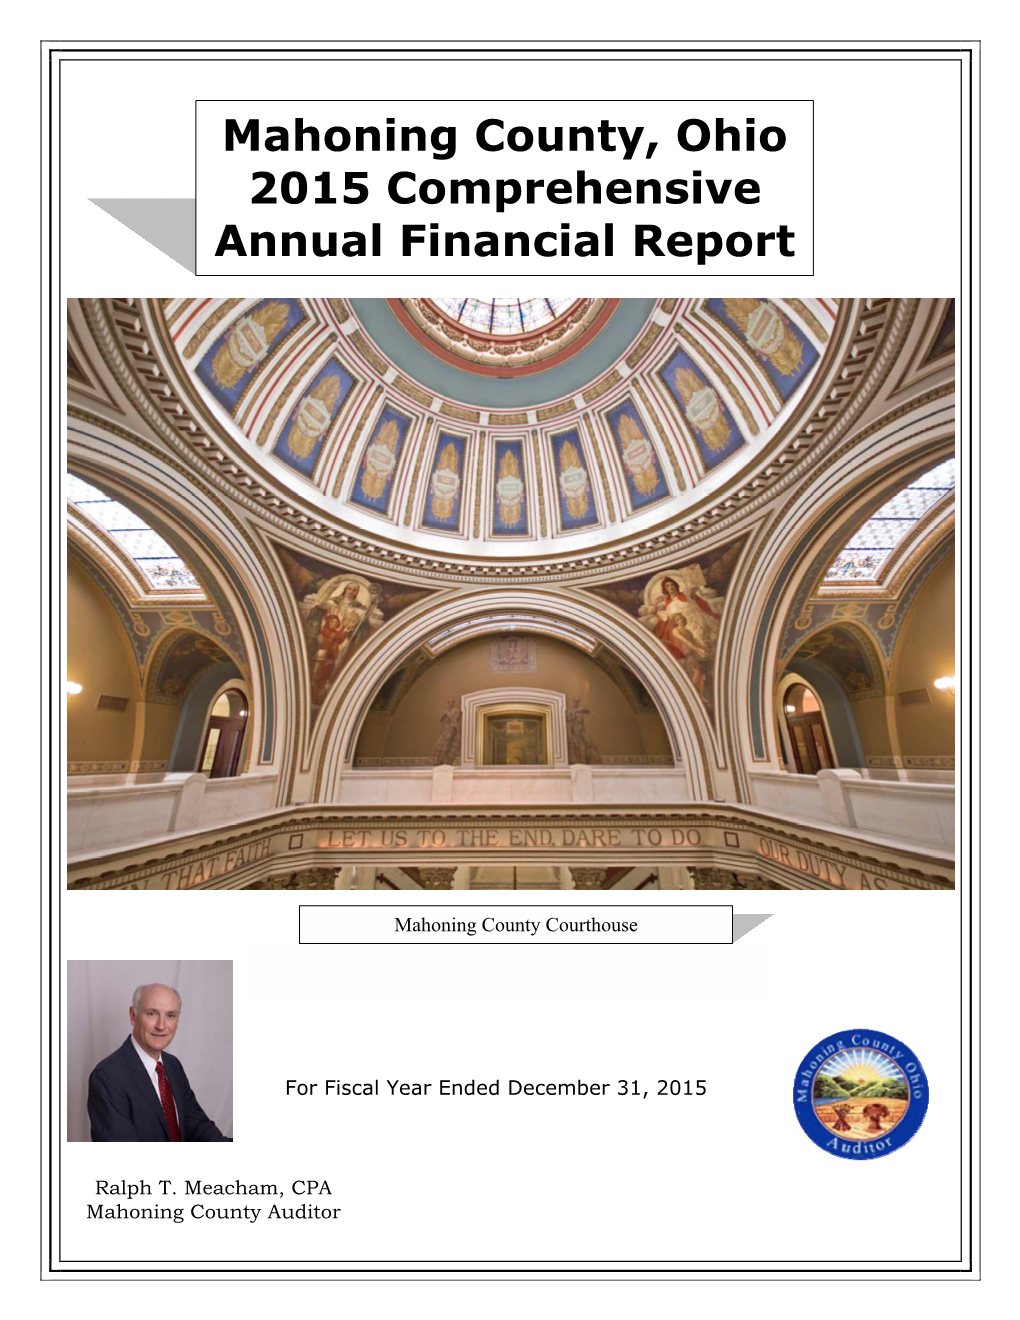 Mahoning County, Ohio 2015 Comprehensive Annual Financial